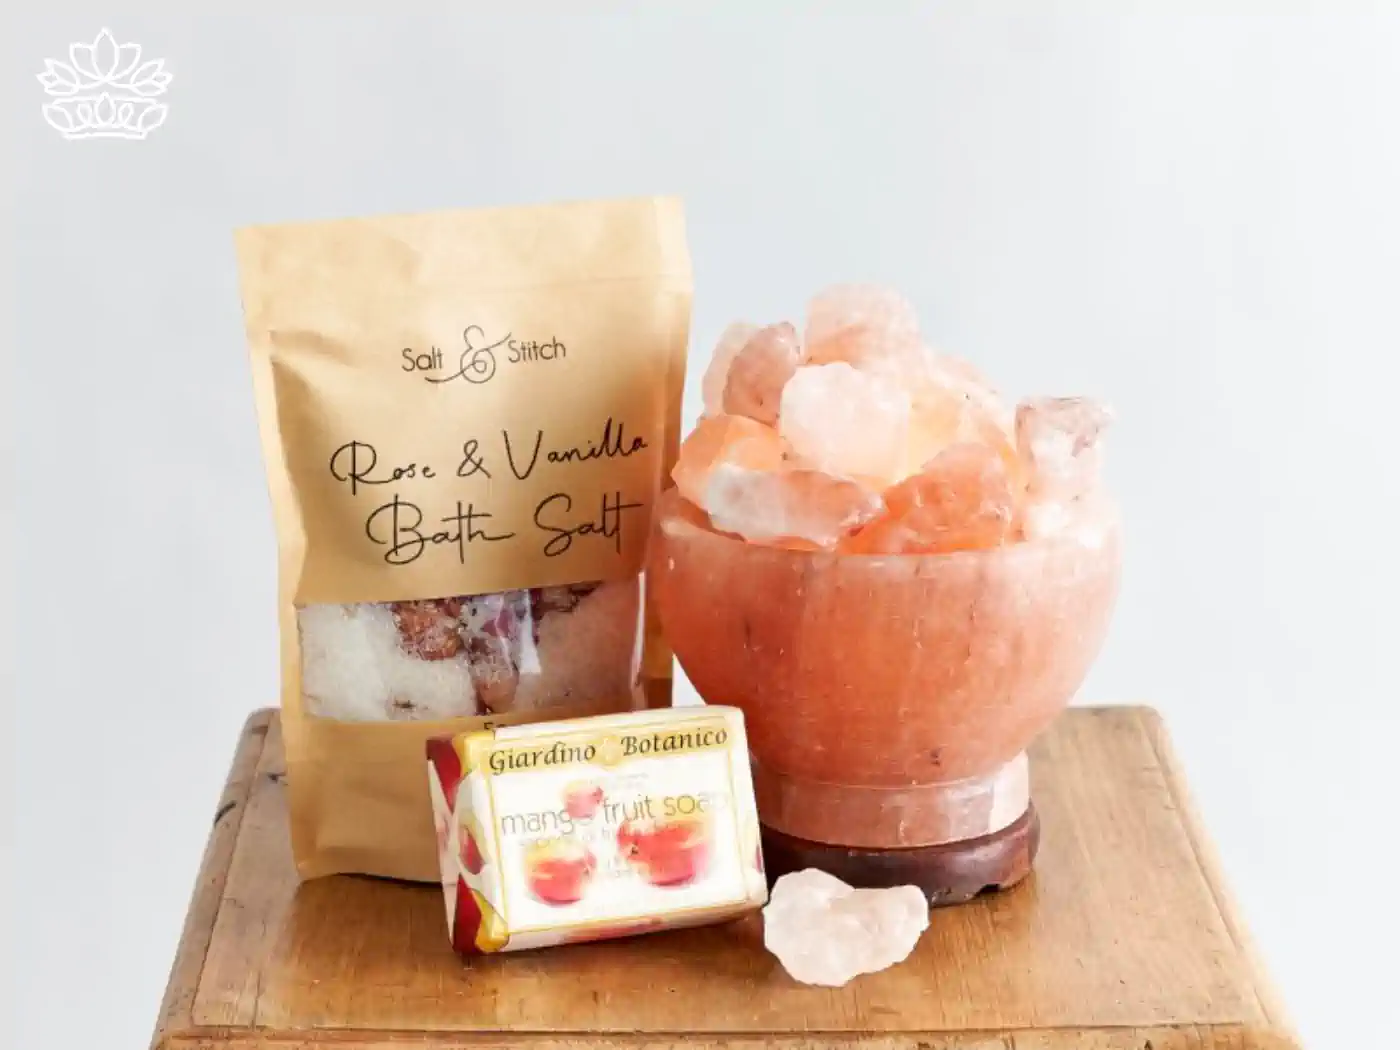 Relaxation gift set featuring rose and vanilla bath salts, Himalayan salt crystals, and a bar of mango fruit soap. Gift Boxes for Sister. Delivered with Heart. Fabulous Flowers and Gifts.